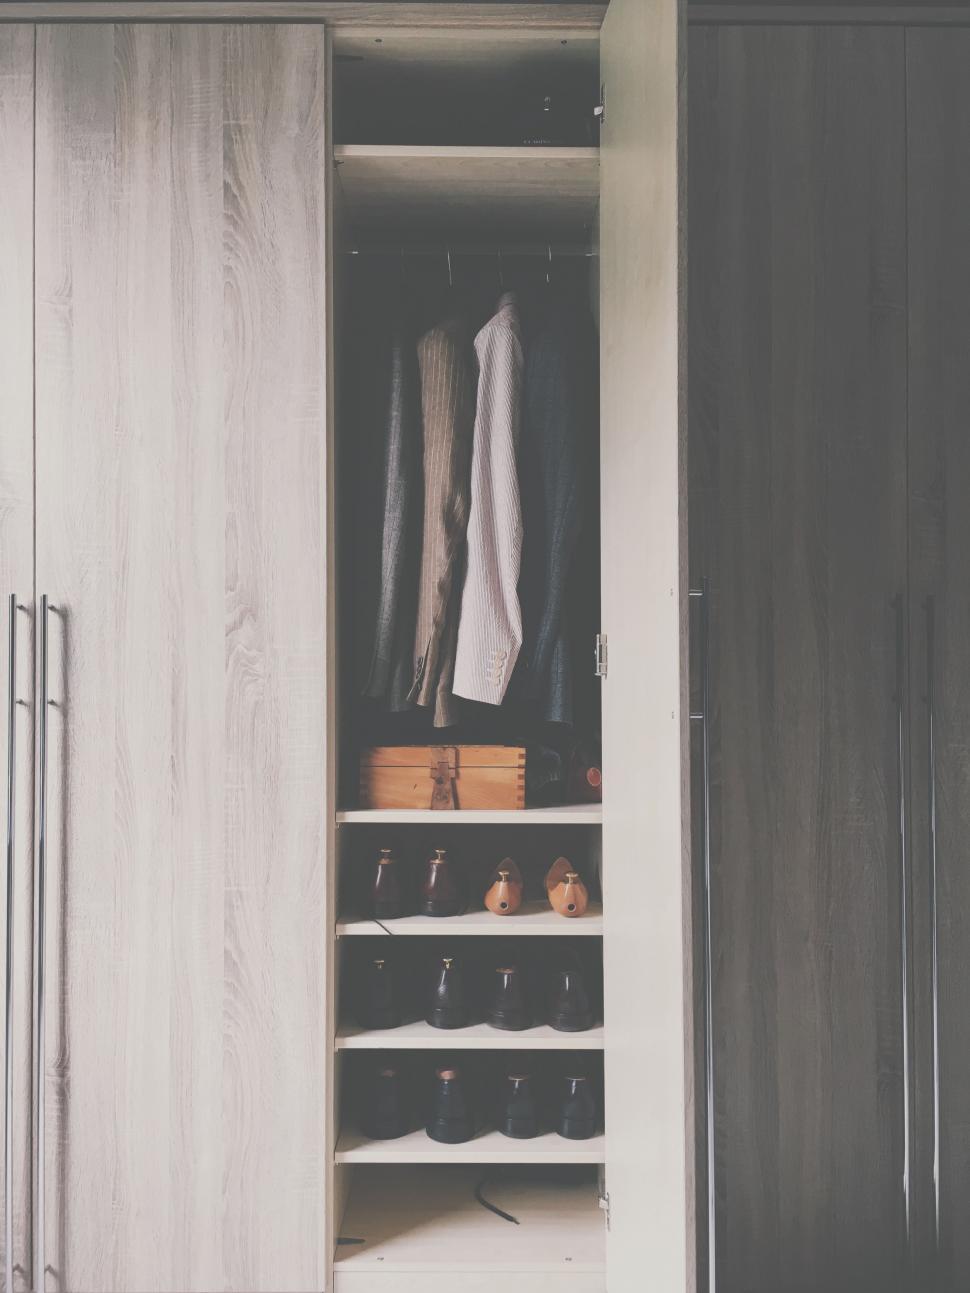 Free Image of Open Closet With Pair of Shoes 